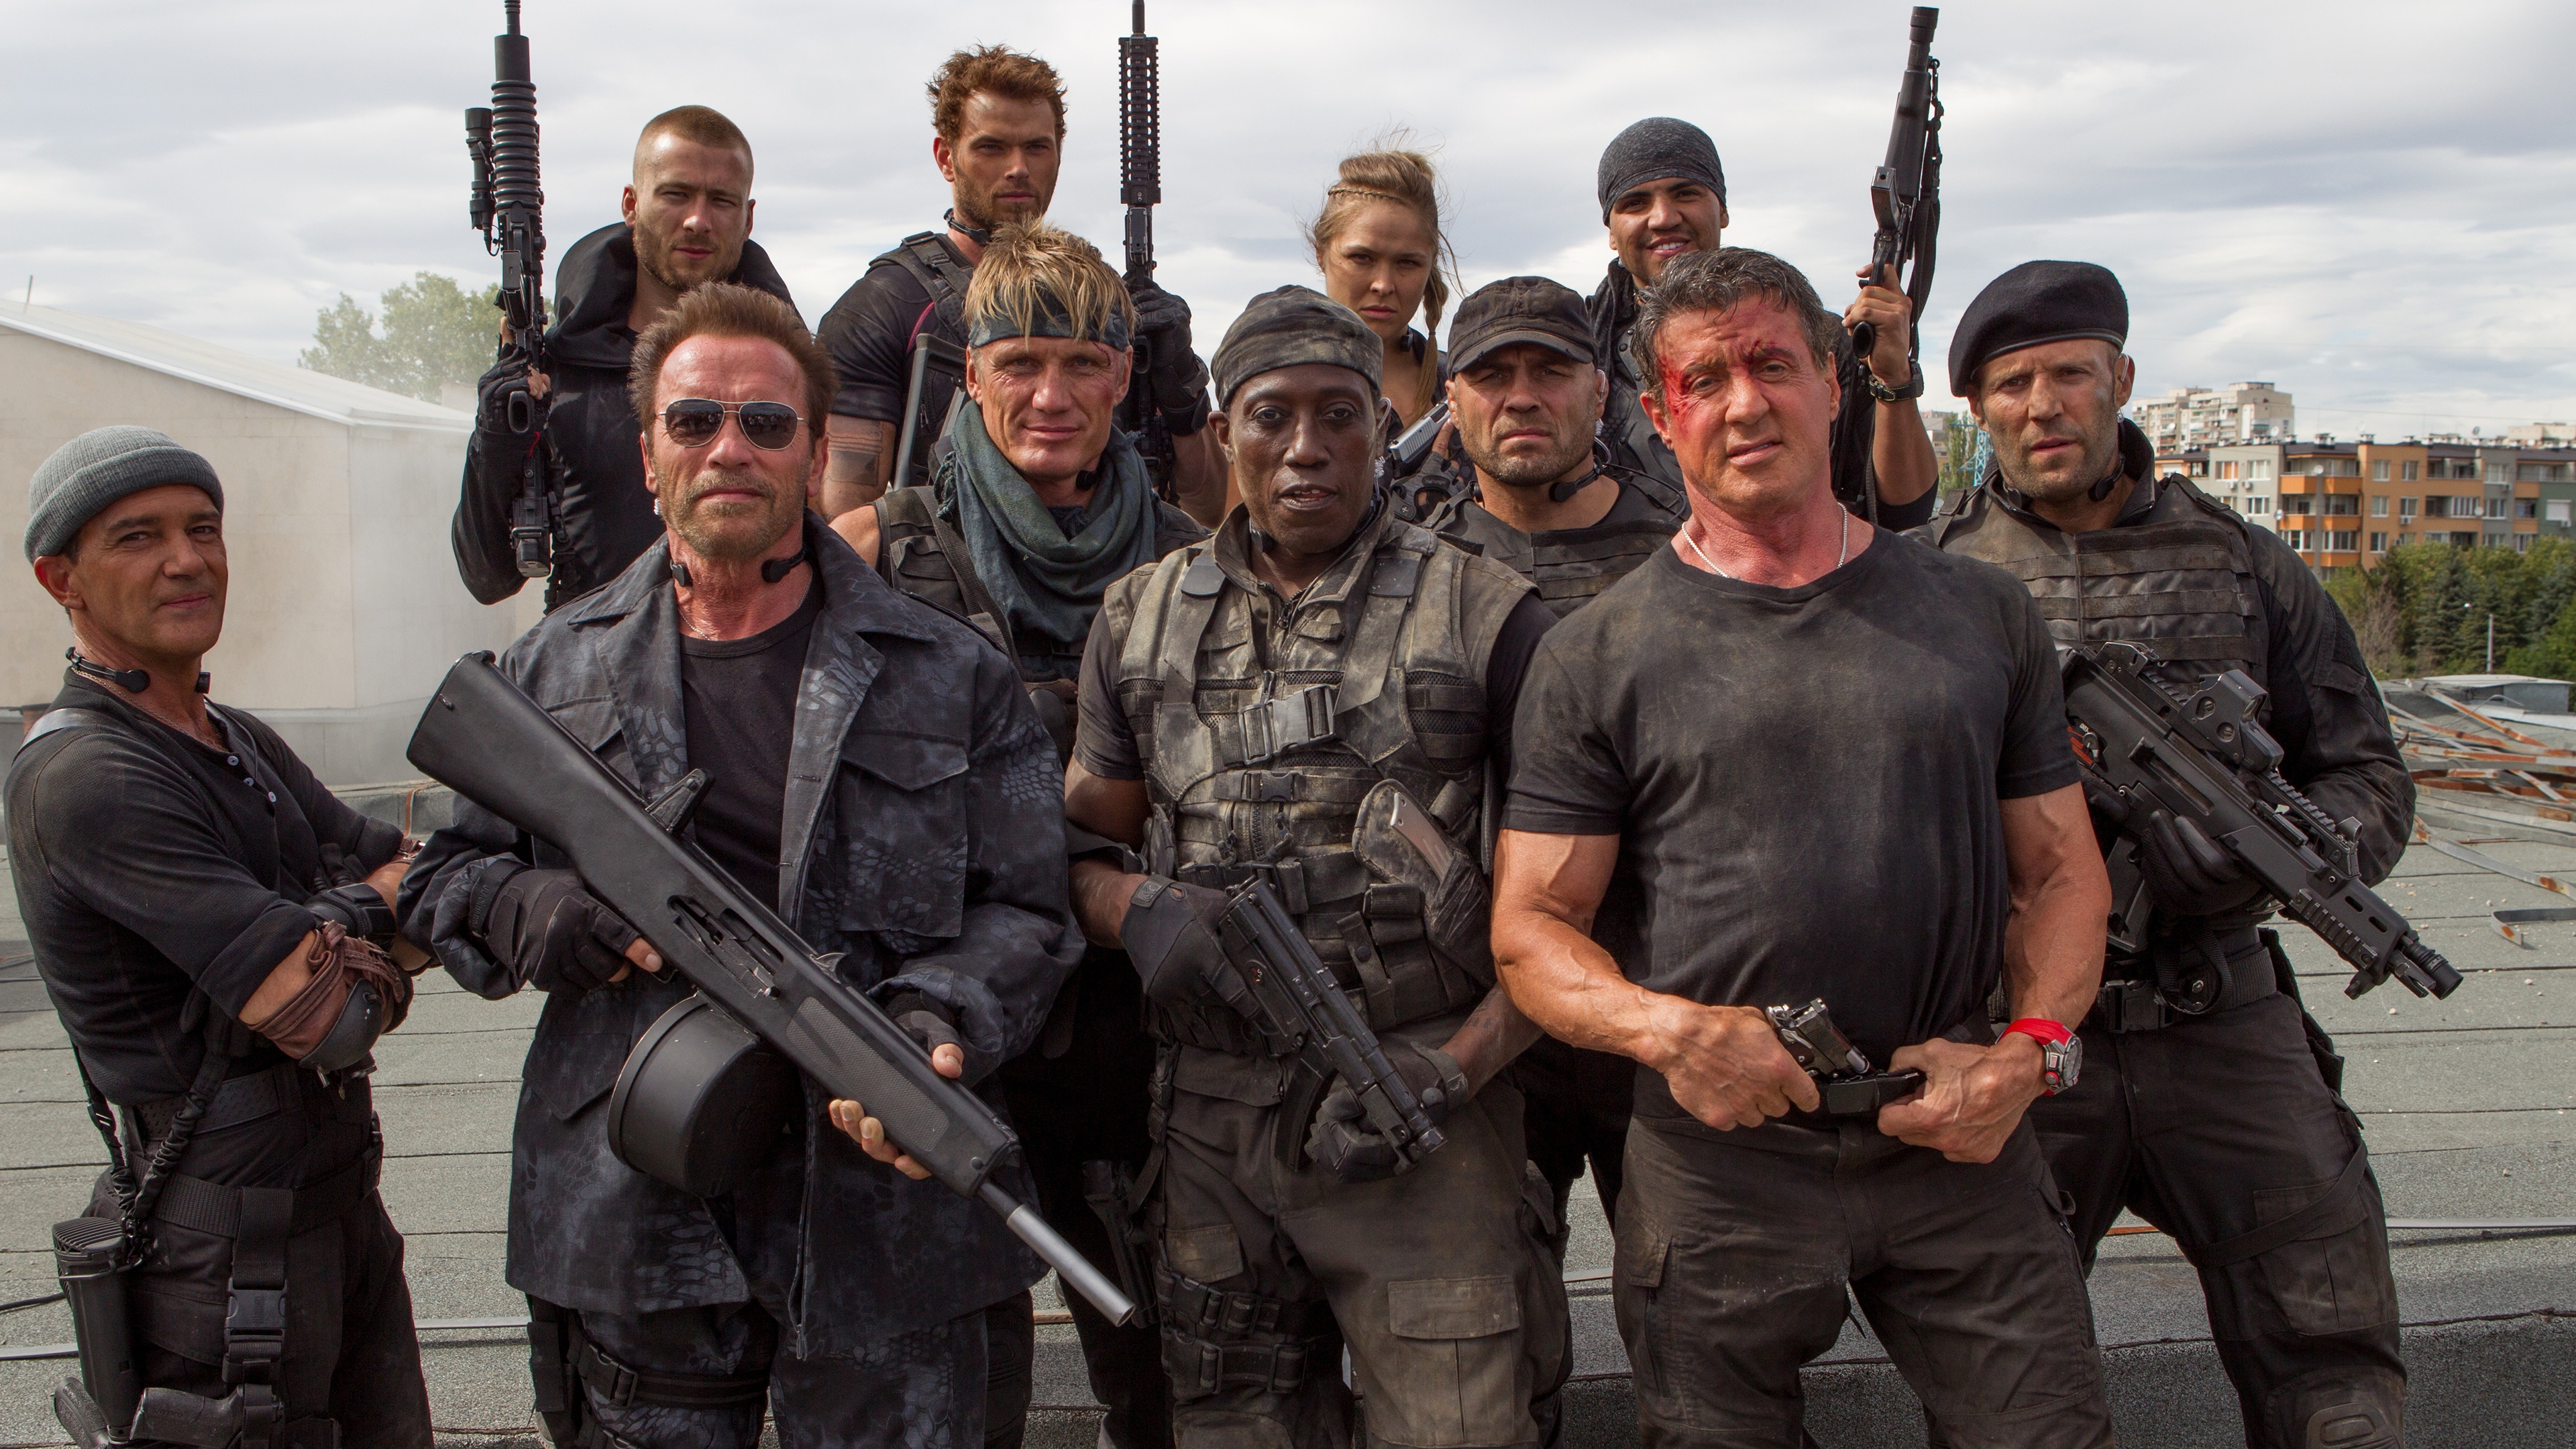 movie, the expendables 3, antonio banderas, arnold schwarzenegger, jason statham, sylvester stallone, wesley snipes, the expendables